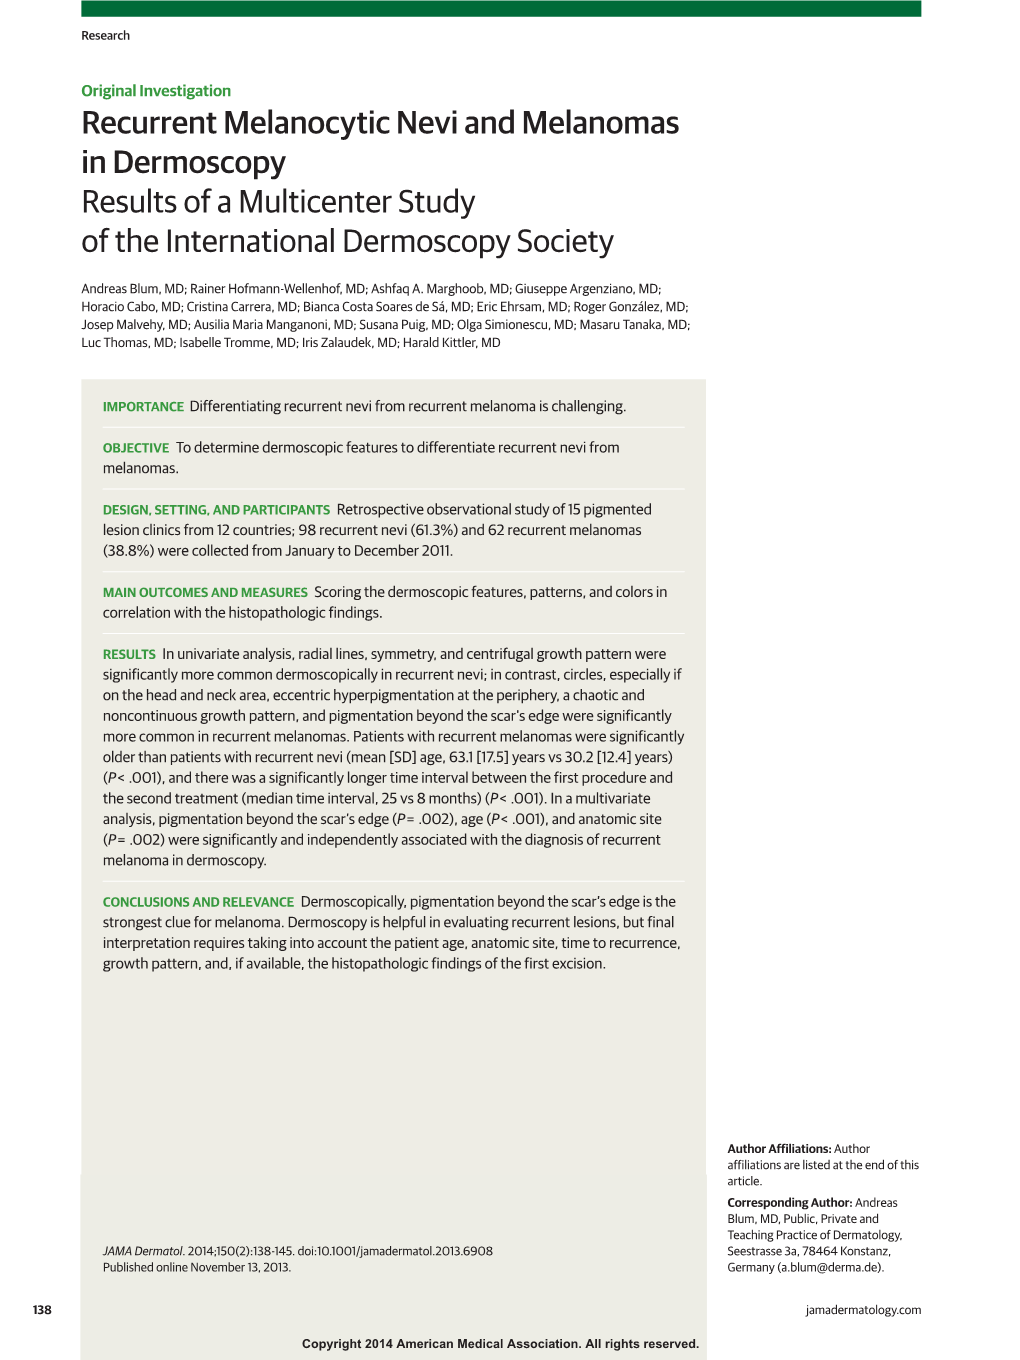 Recurrent Melanocytic Nevi and Melanomas in Dermoscopy Results of a Multicenter Study of the International Dermoscopy Society